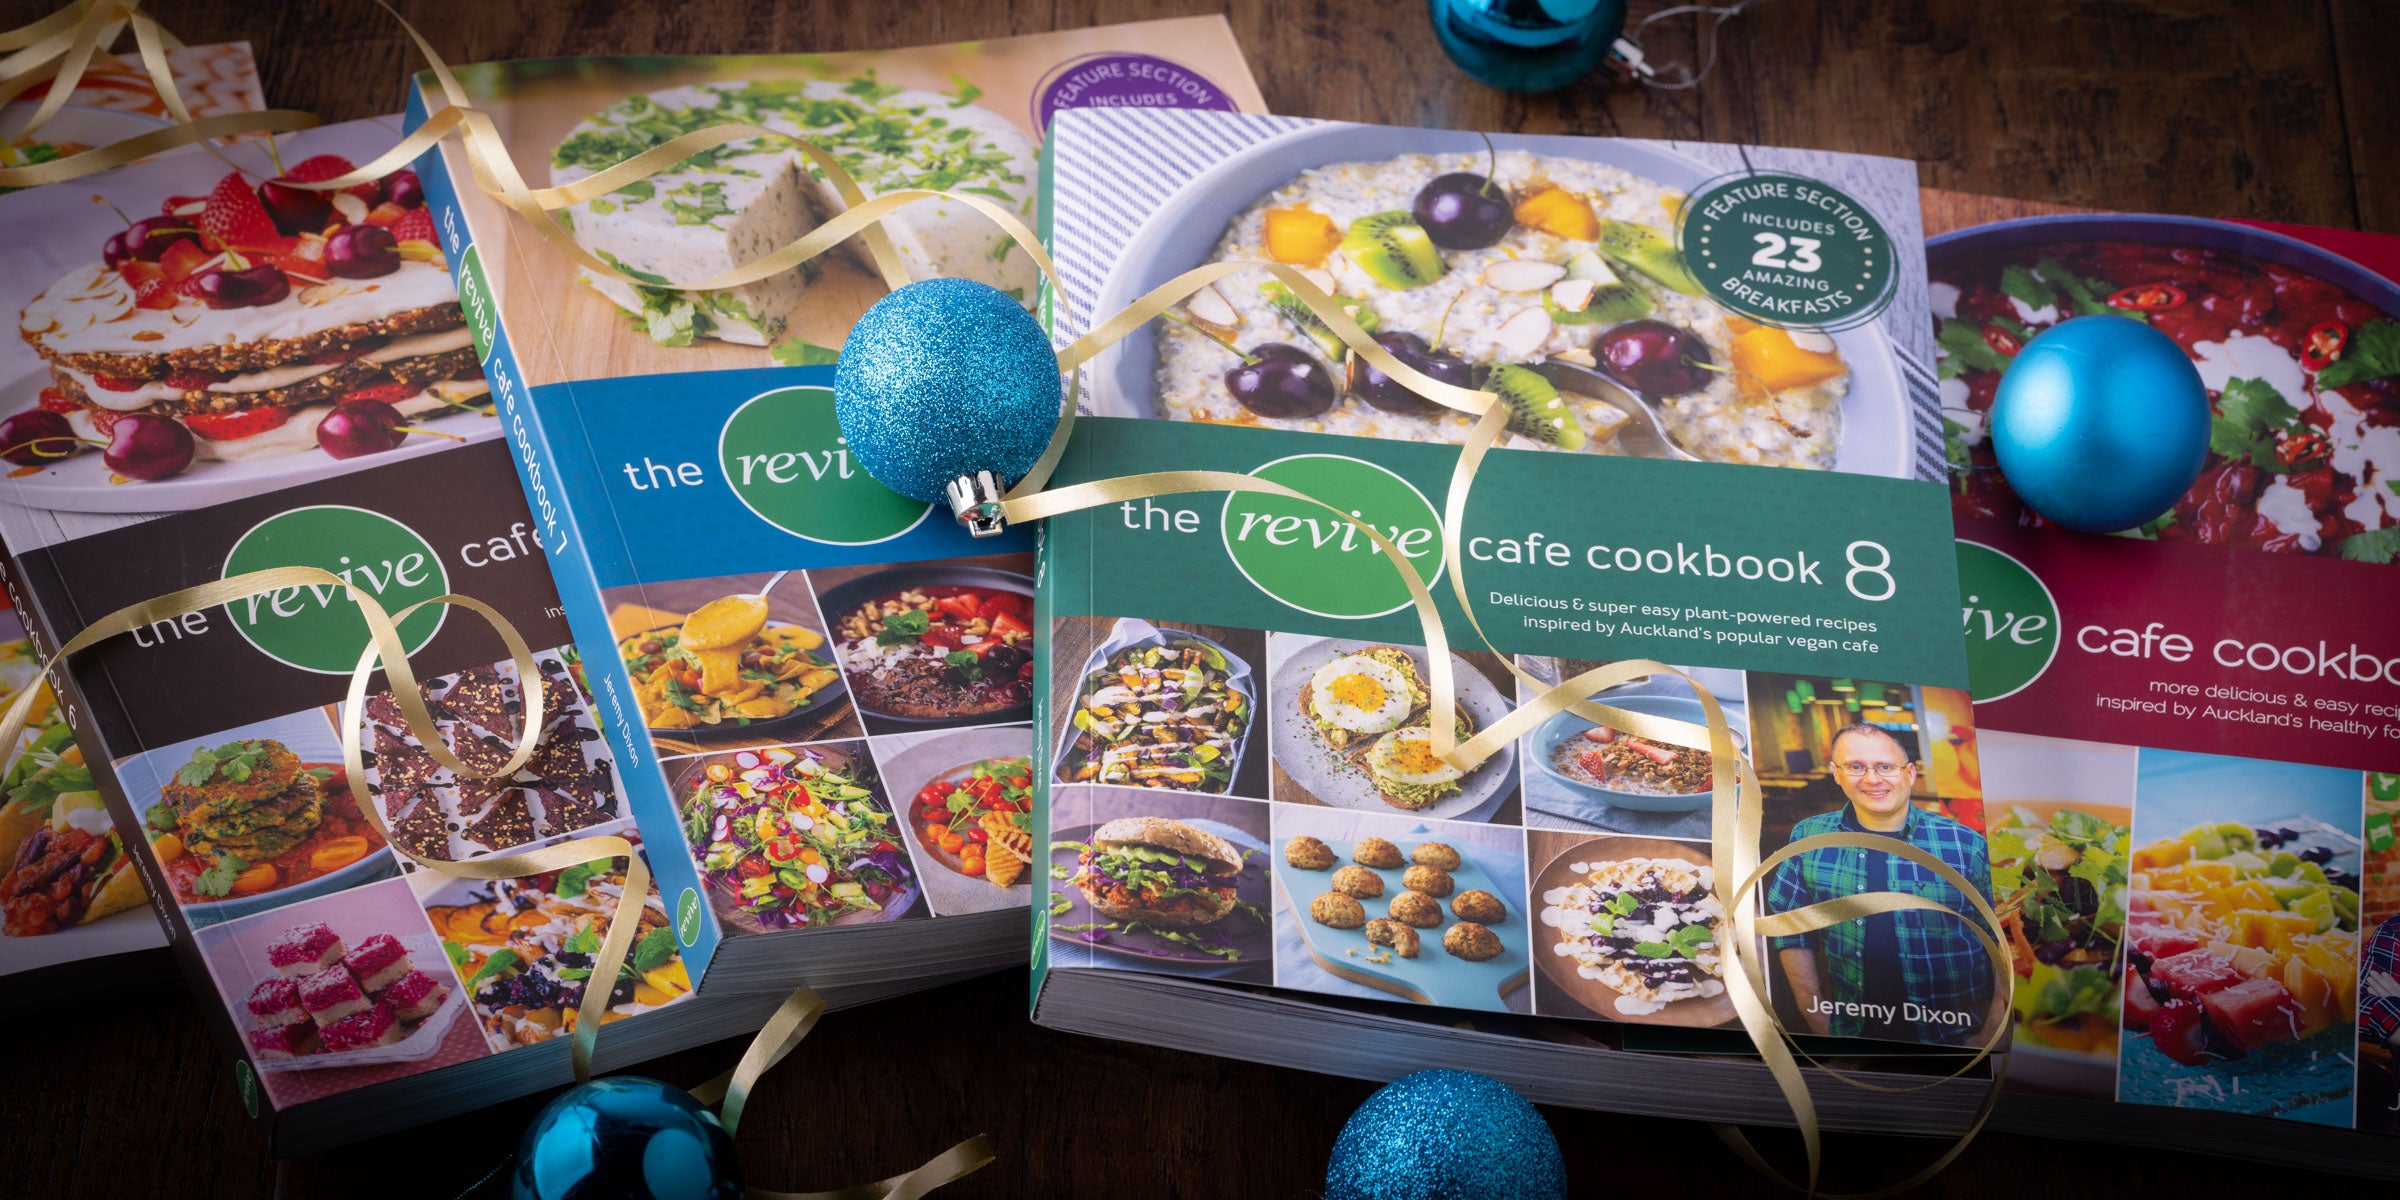 Latest book: The Revive Cafe Cookbook 8!